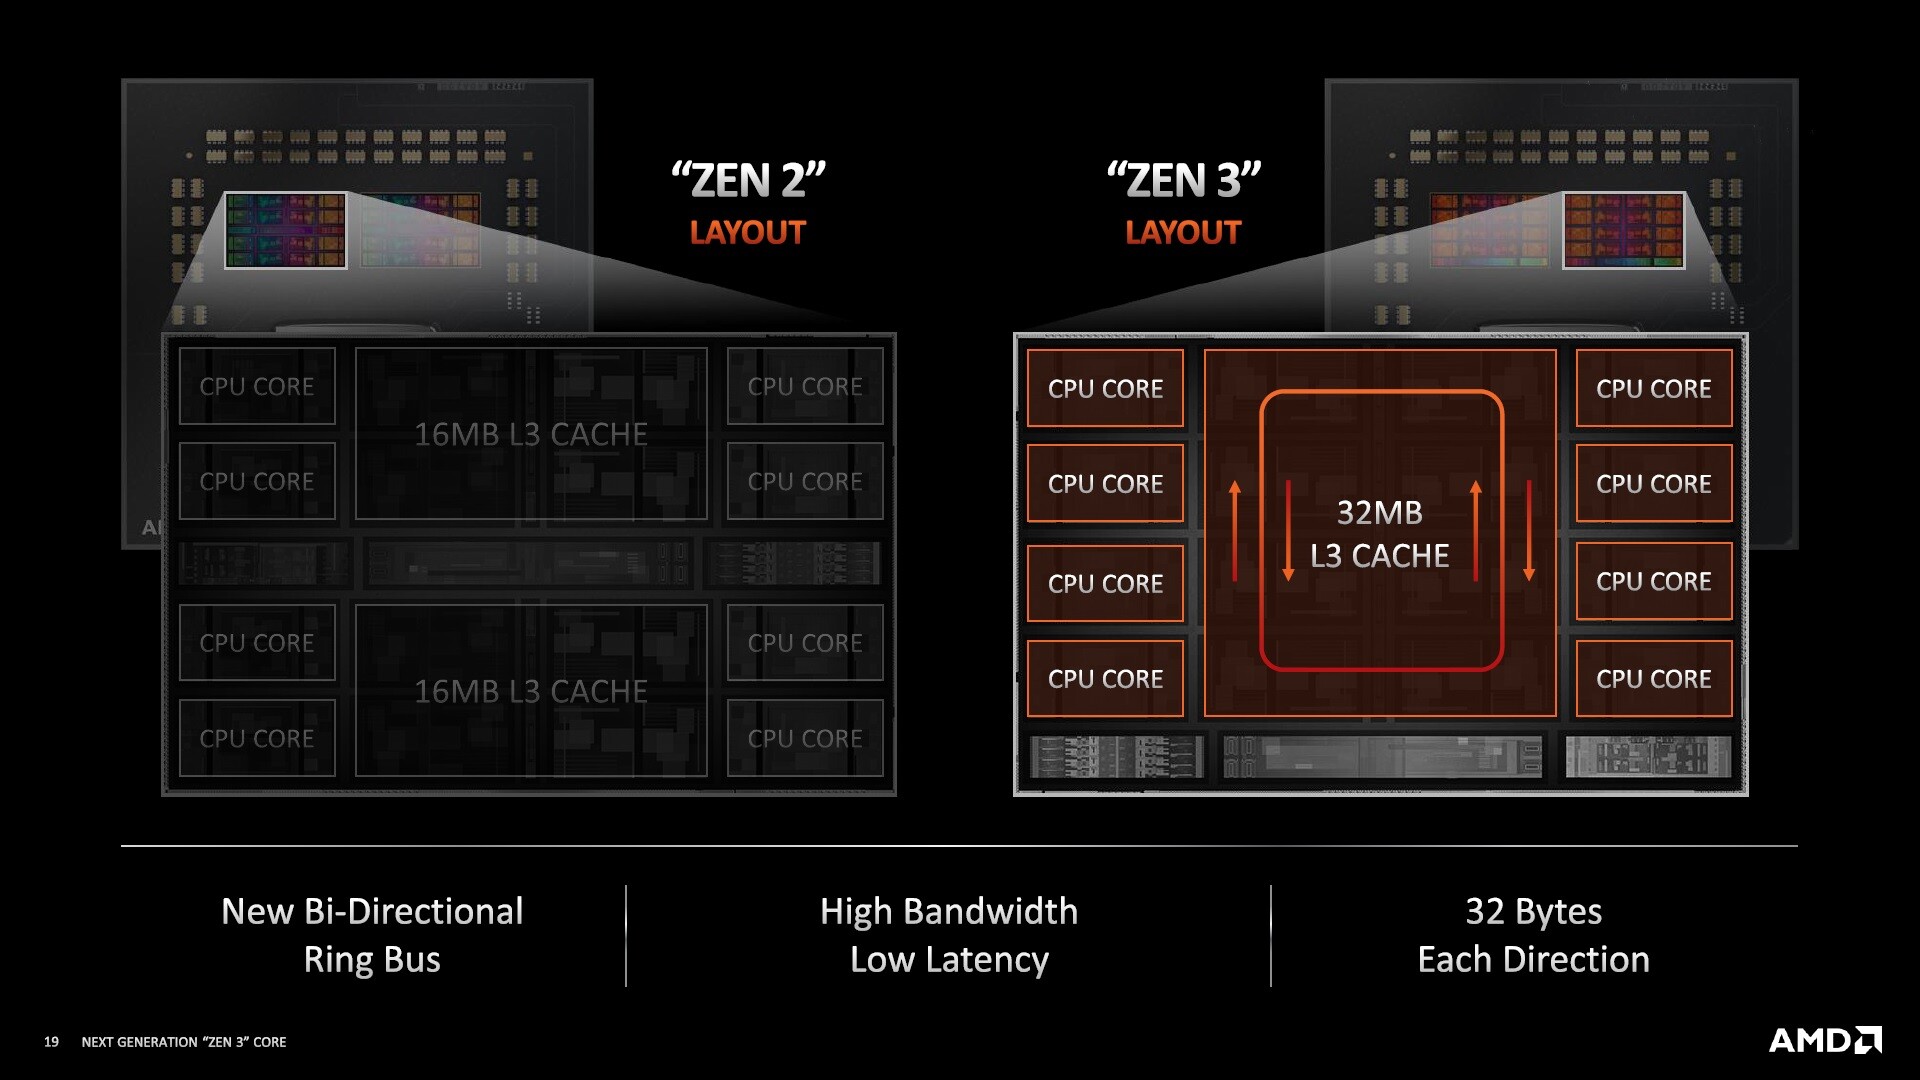 Understand the differences between Zen 3 and Zen 2 architectures in support of Ring Bus and Full Interconnectivity topologies